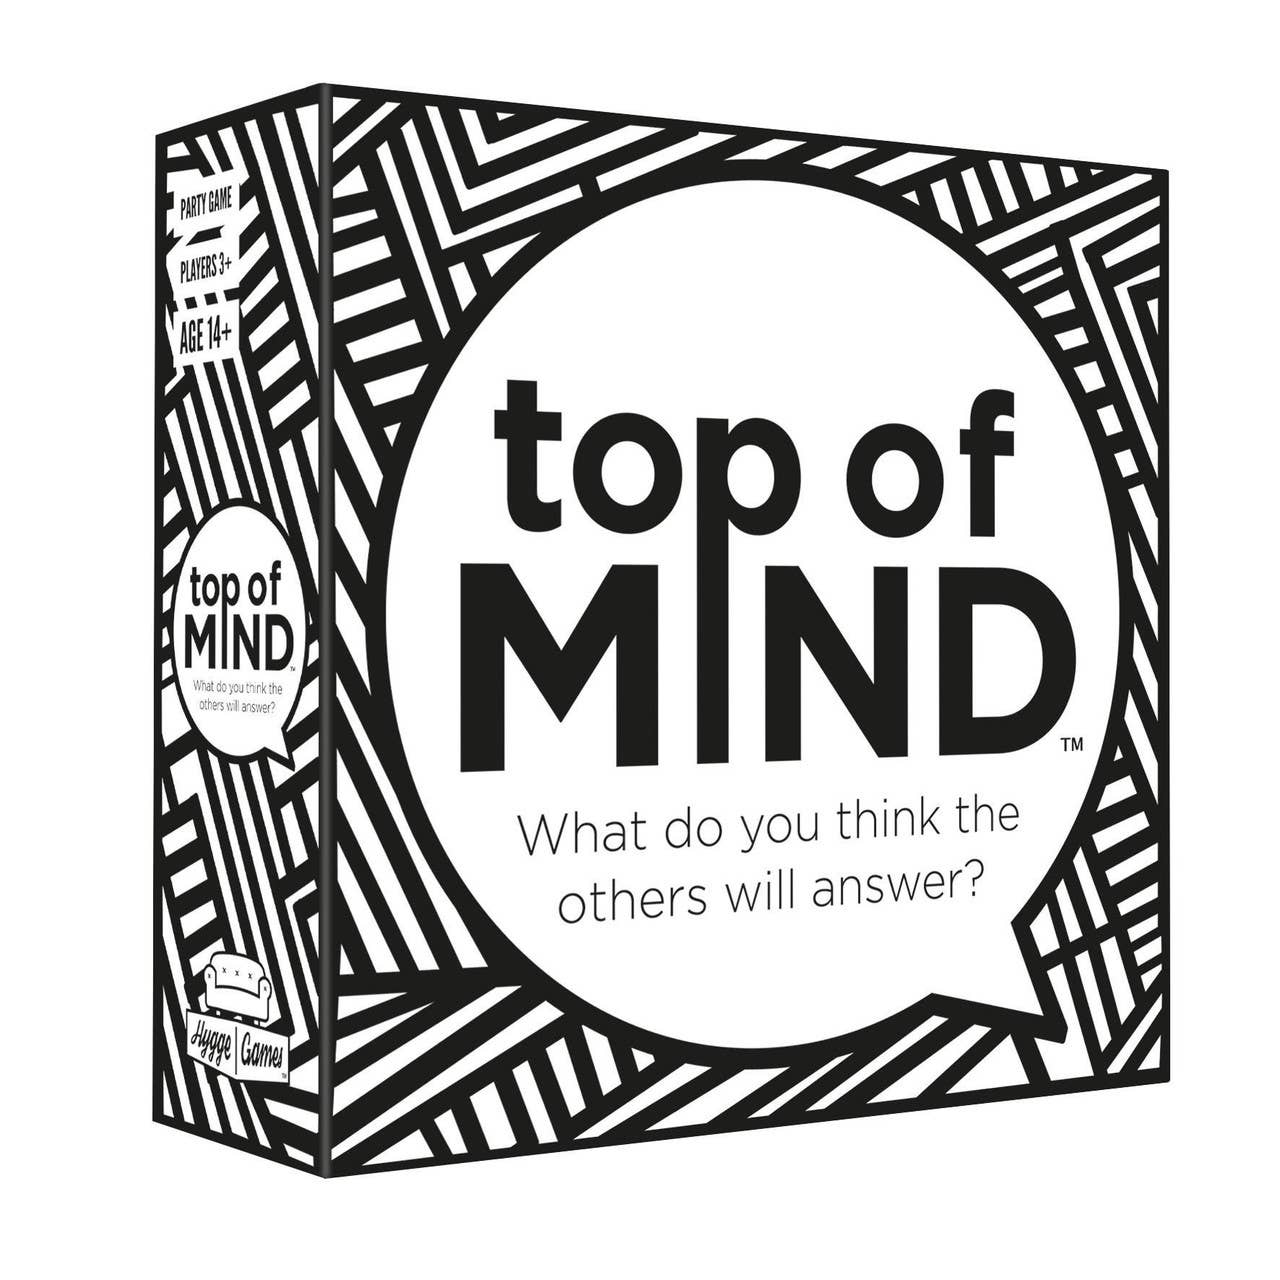 Top of Mind Party Game, what do you think the others will answer?